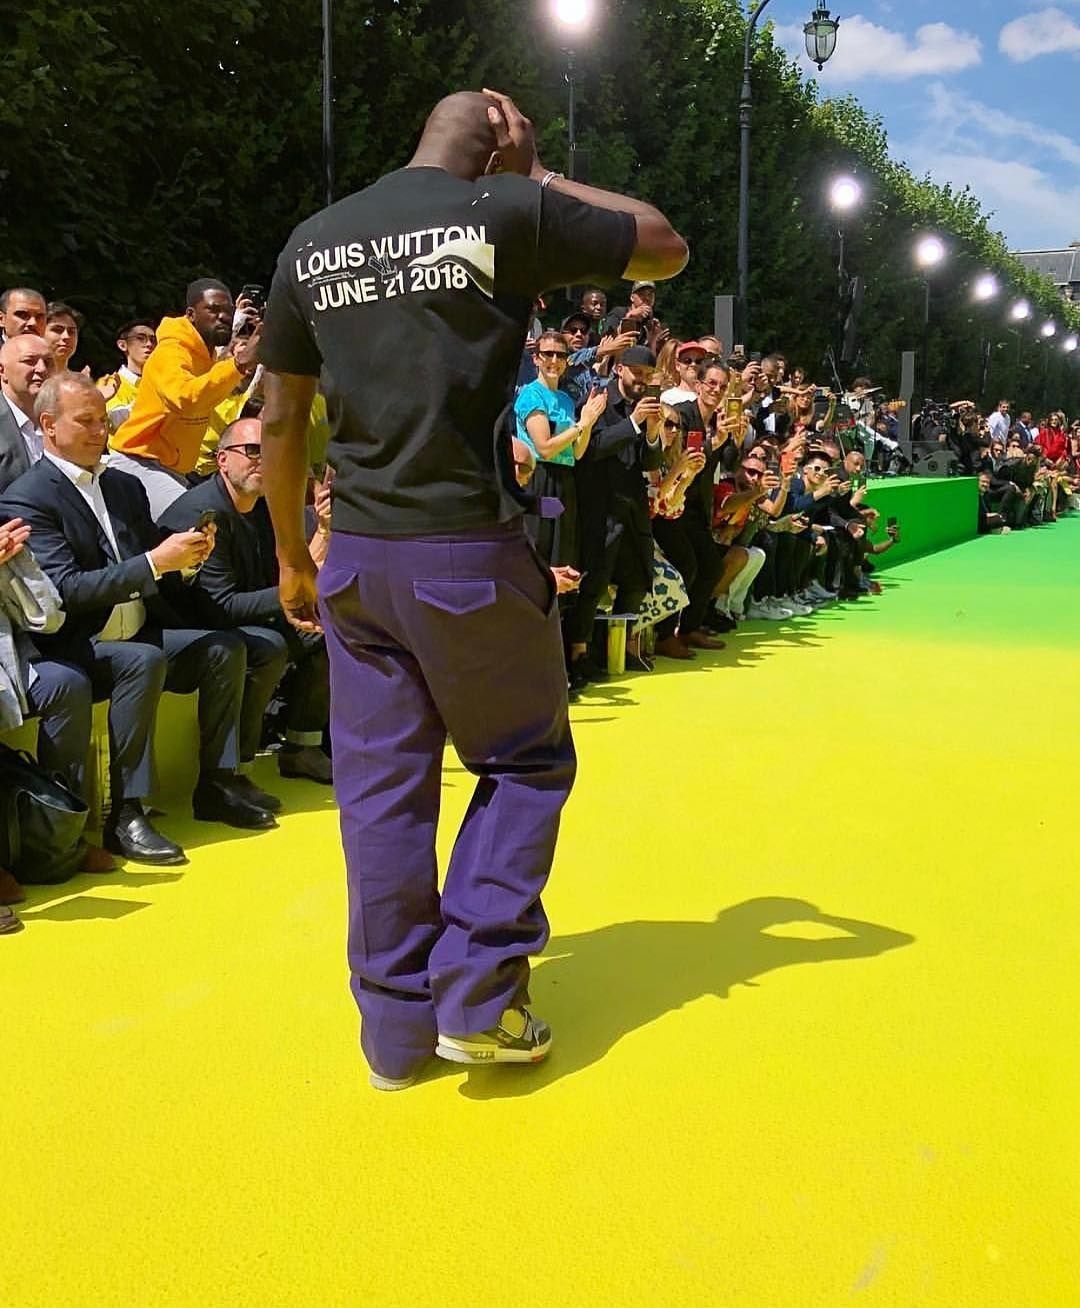 Virgil Abloh Has Presented His First Collection for Louis Vuitton